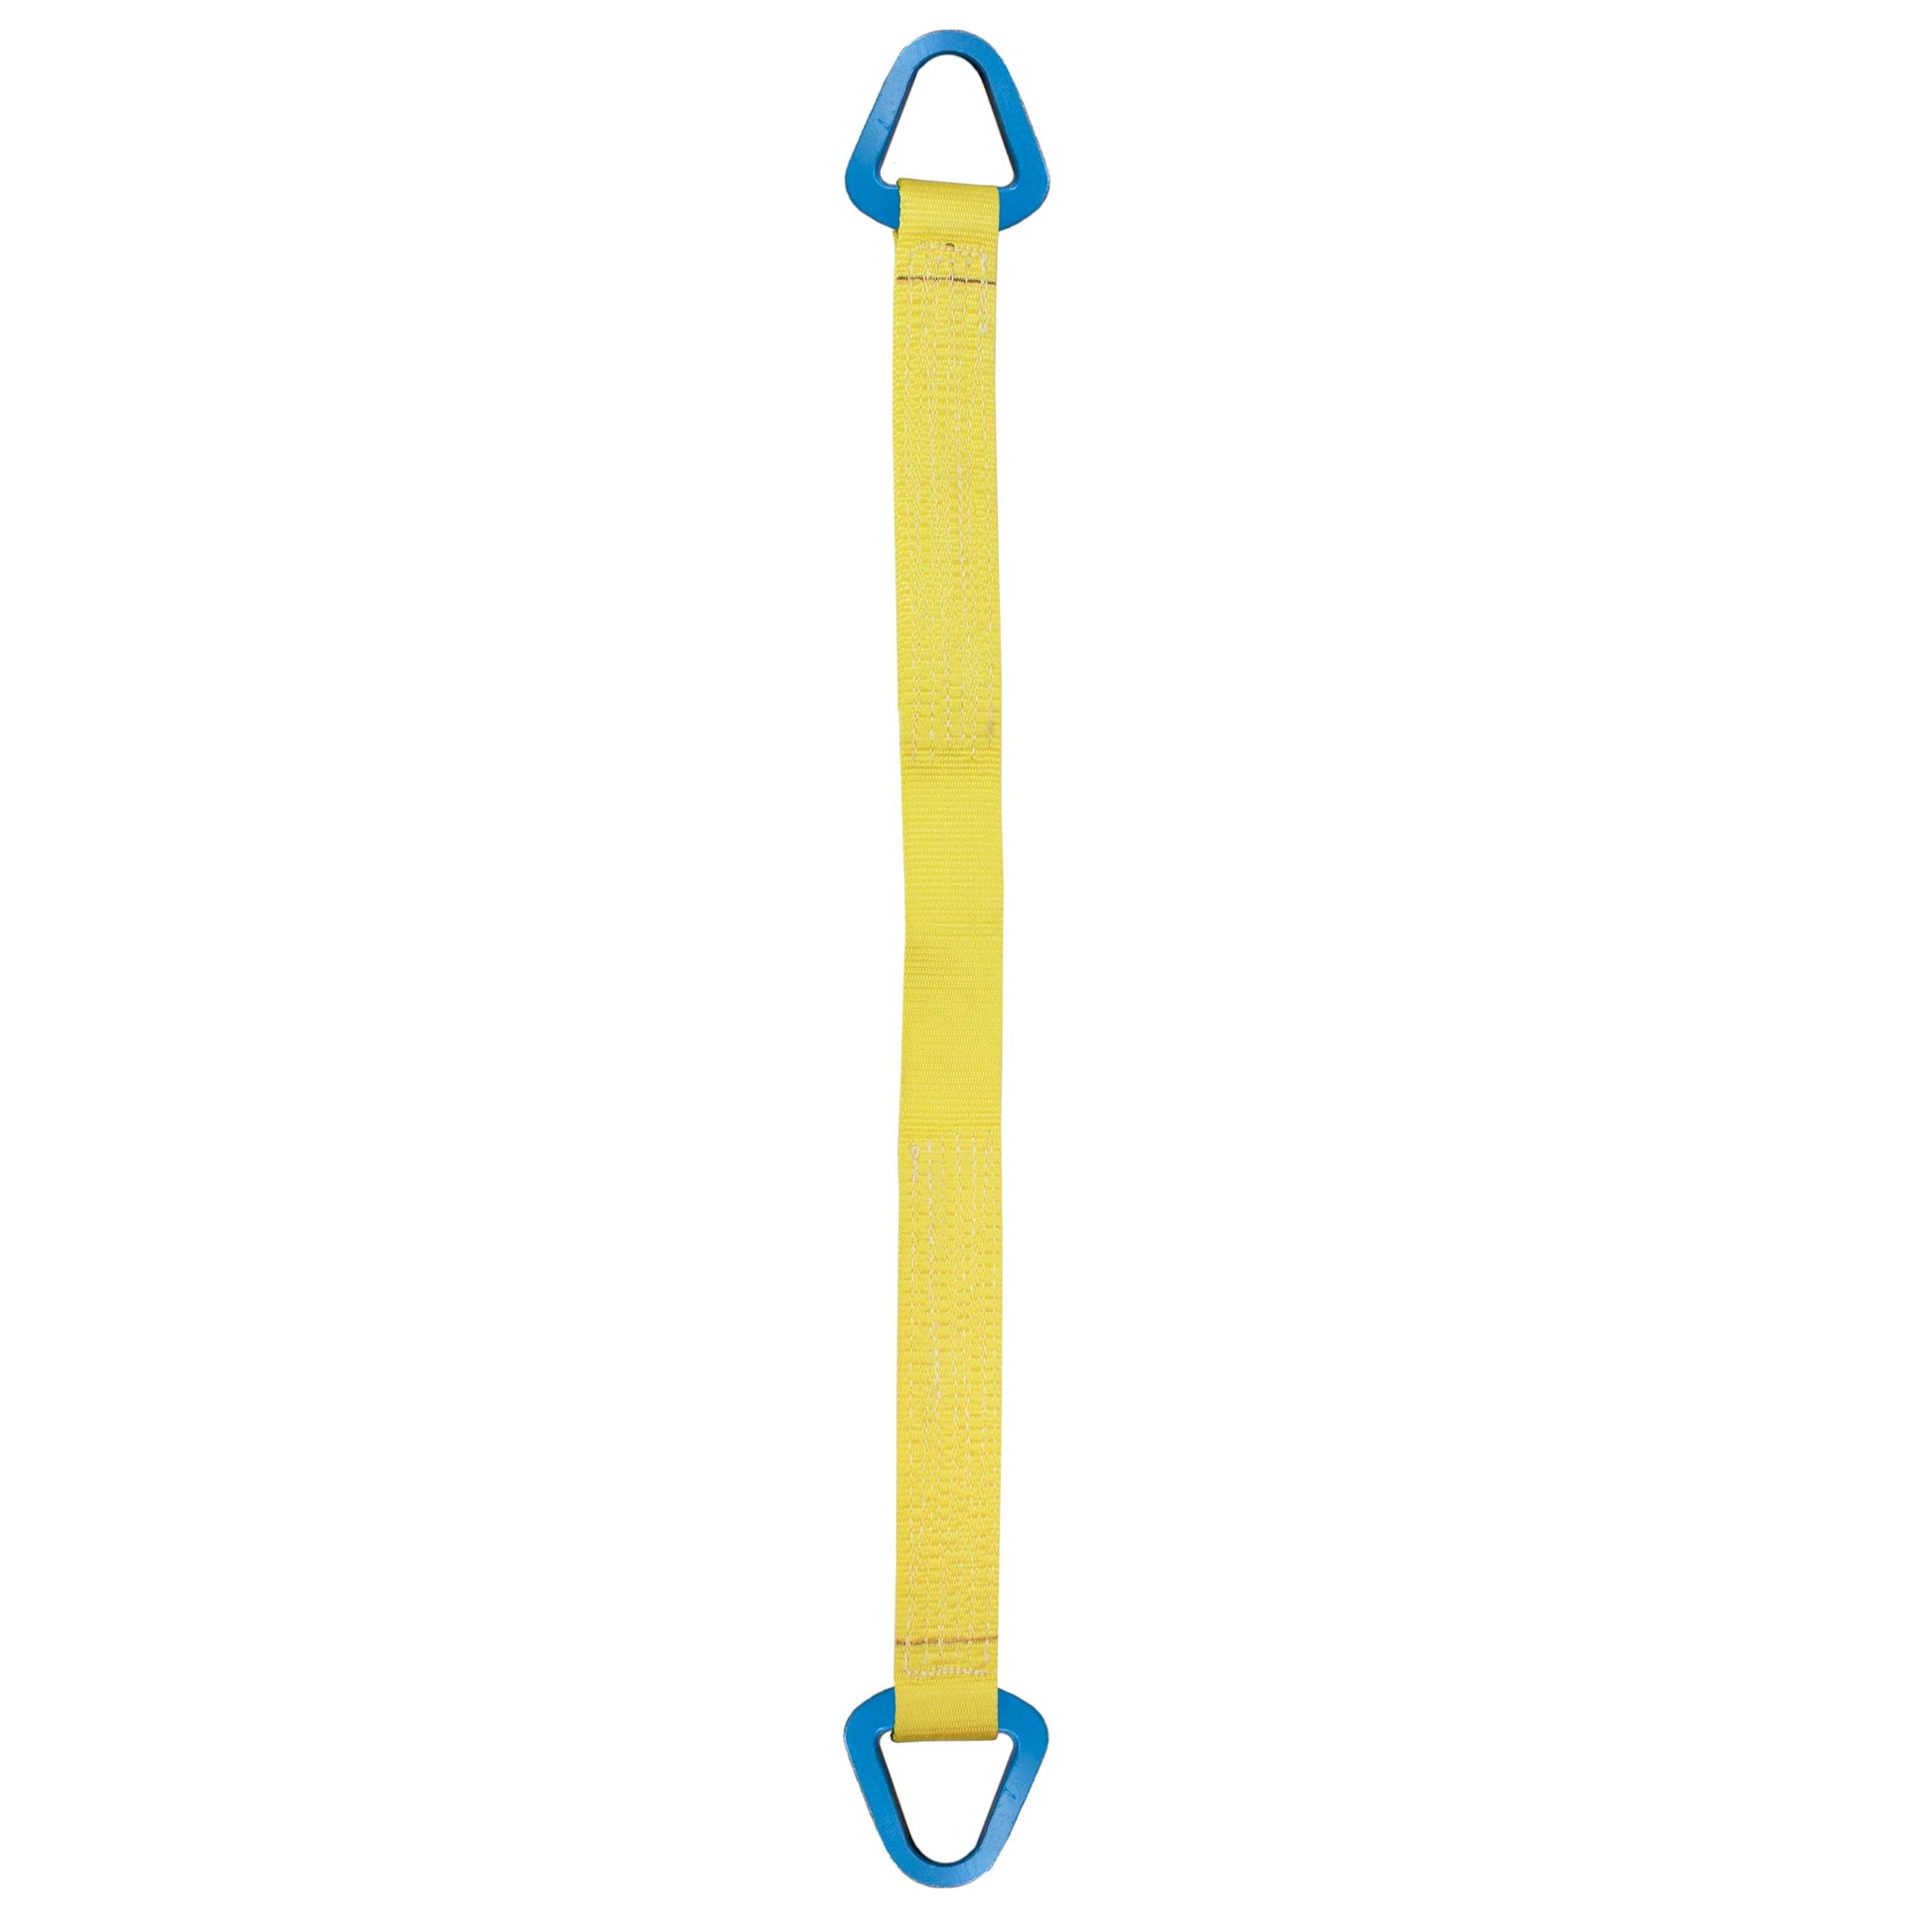 Nylon Lifting Sling Triangle 2 inch x 10 foot 1ply image 1 of 2